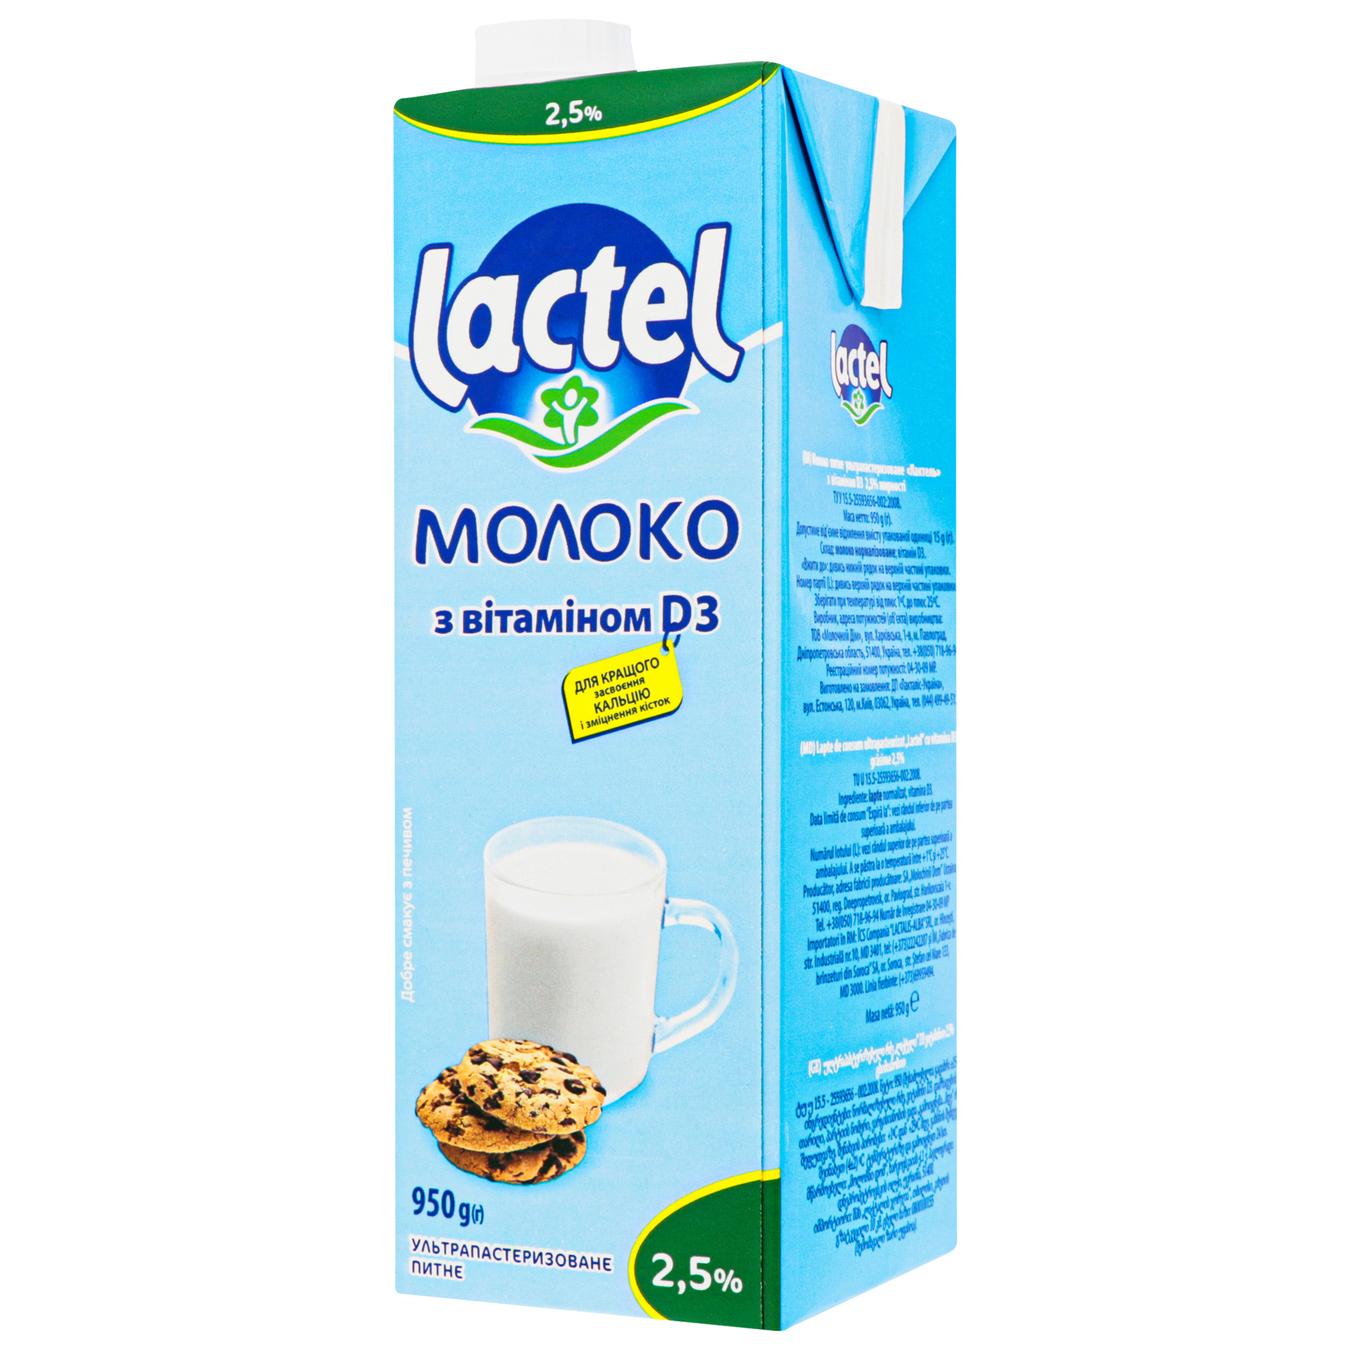 Lactel ultra-pasteurized Milk with vitamin D3 2,5% 950g